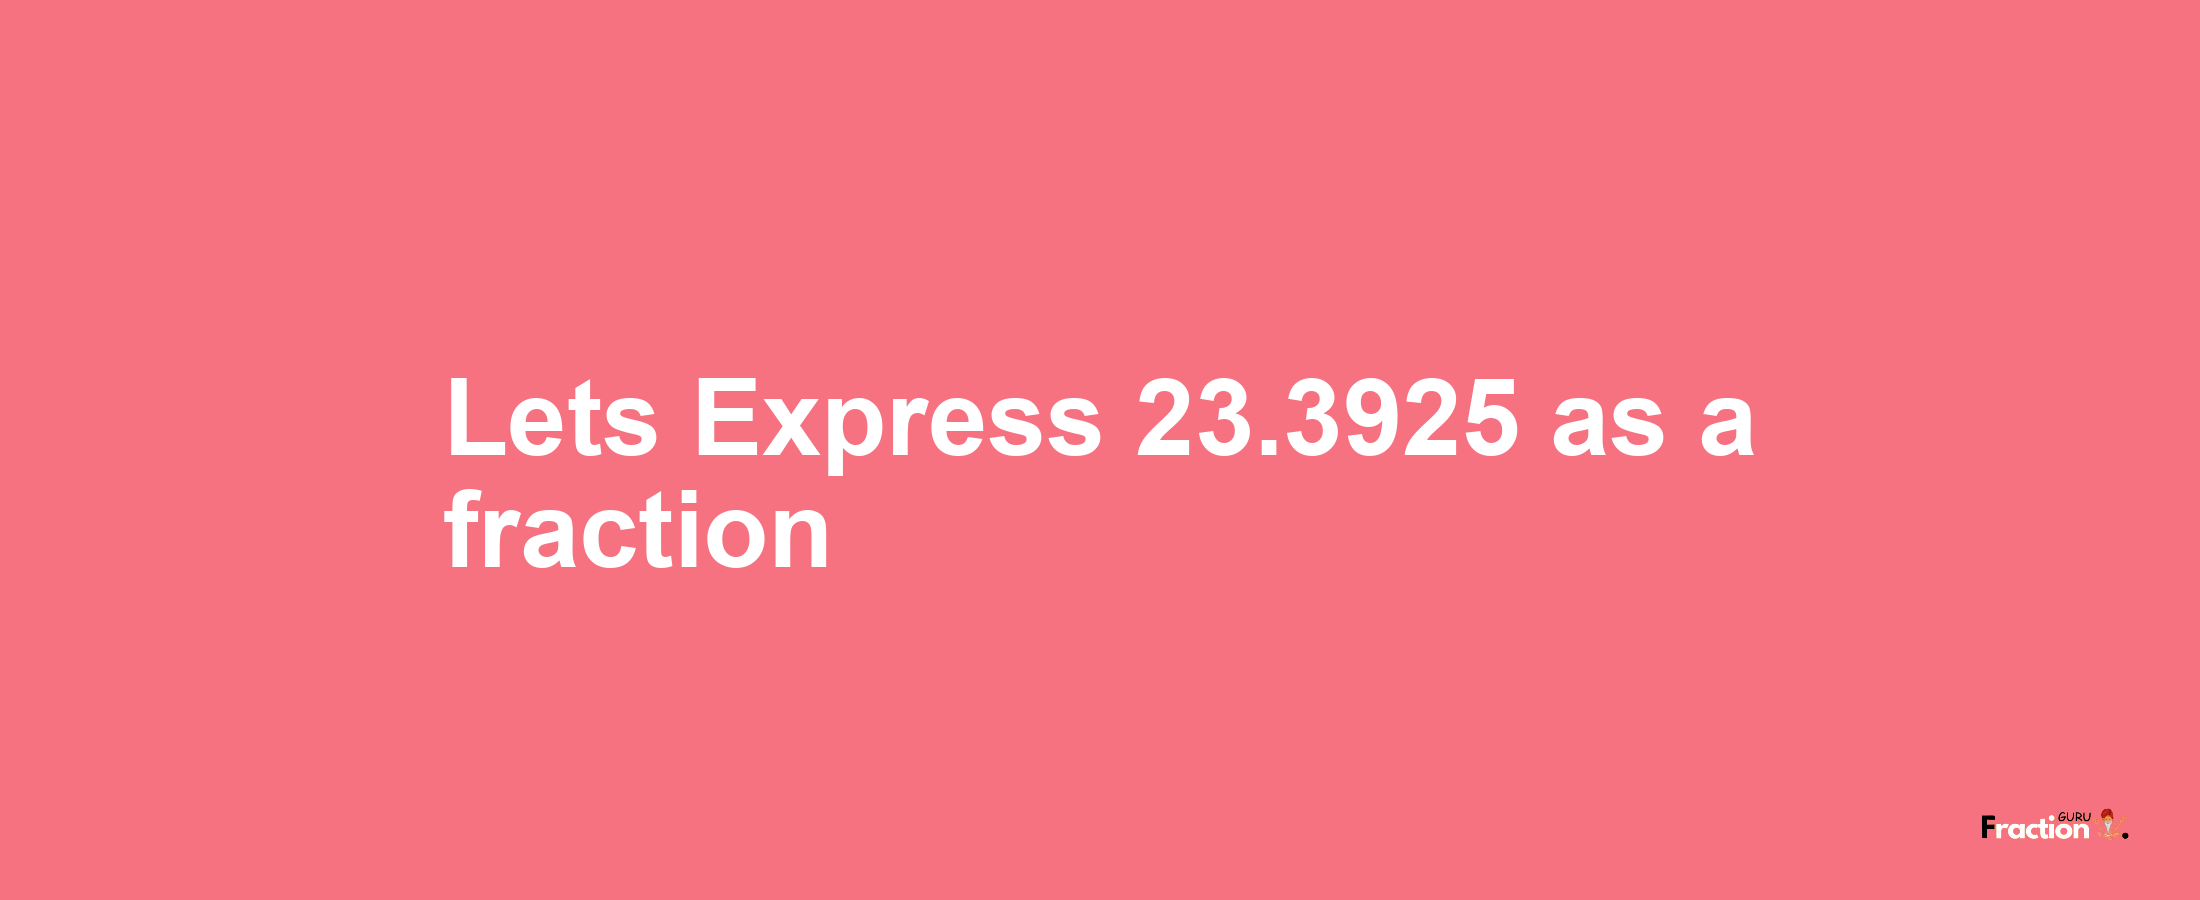 Lets Express 23.3925 as afraction